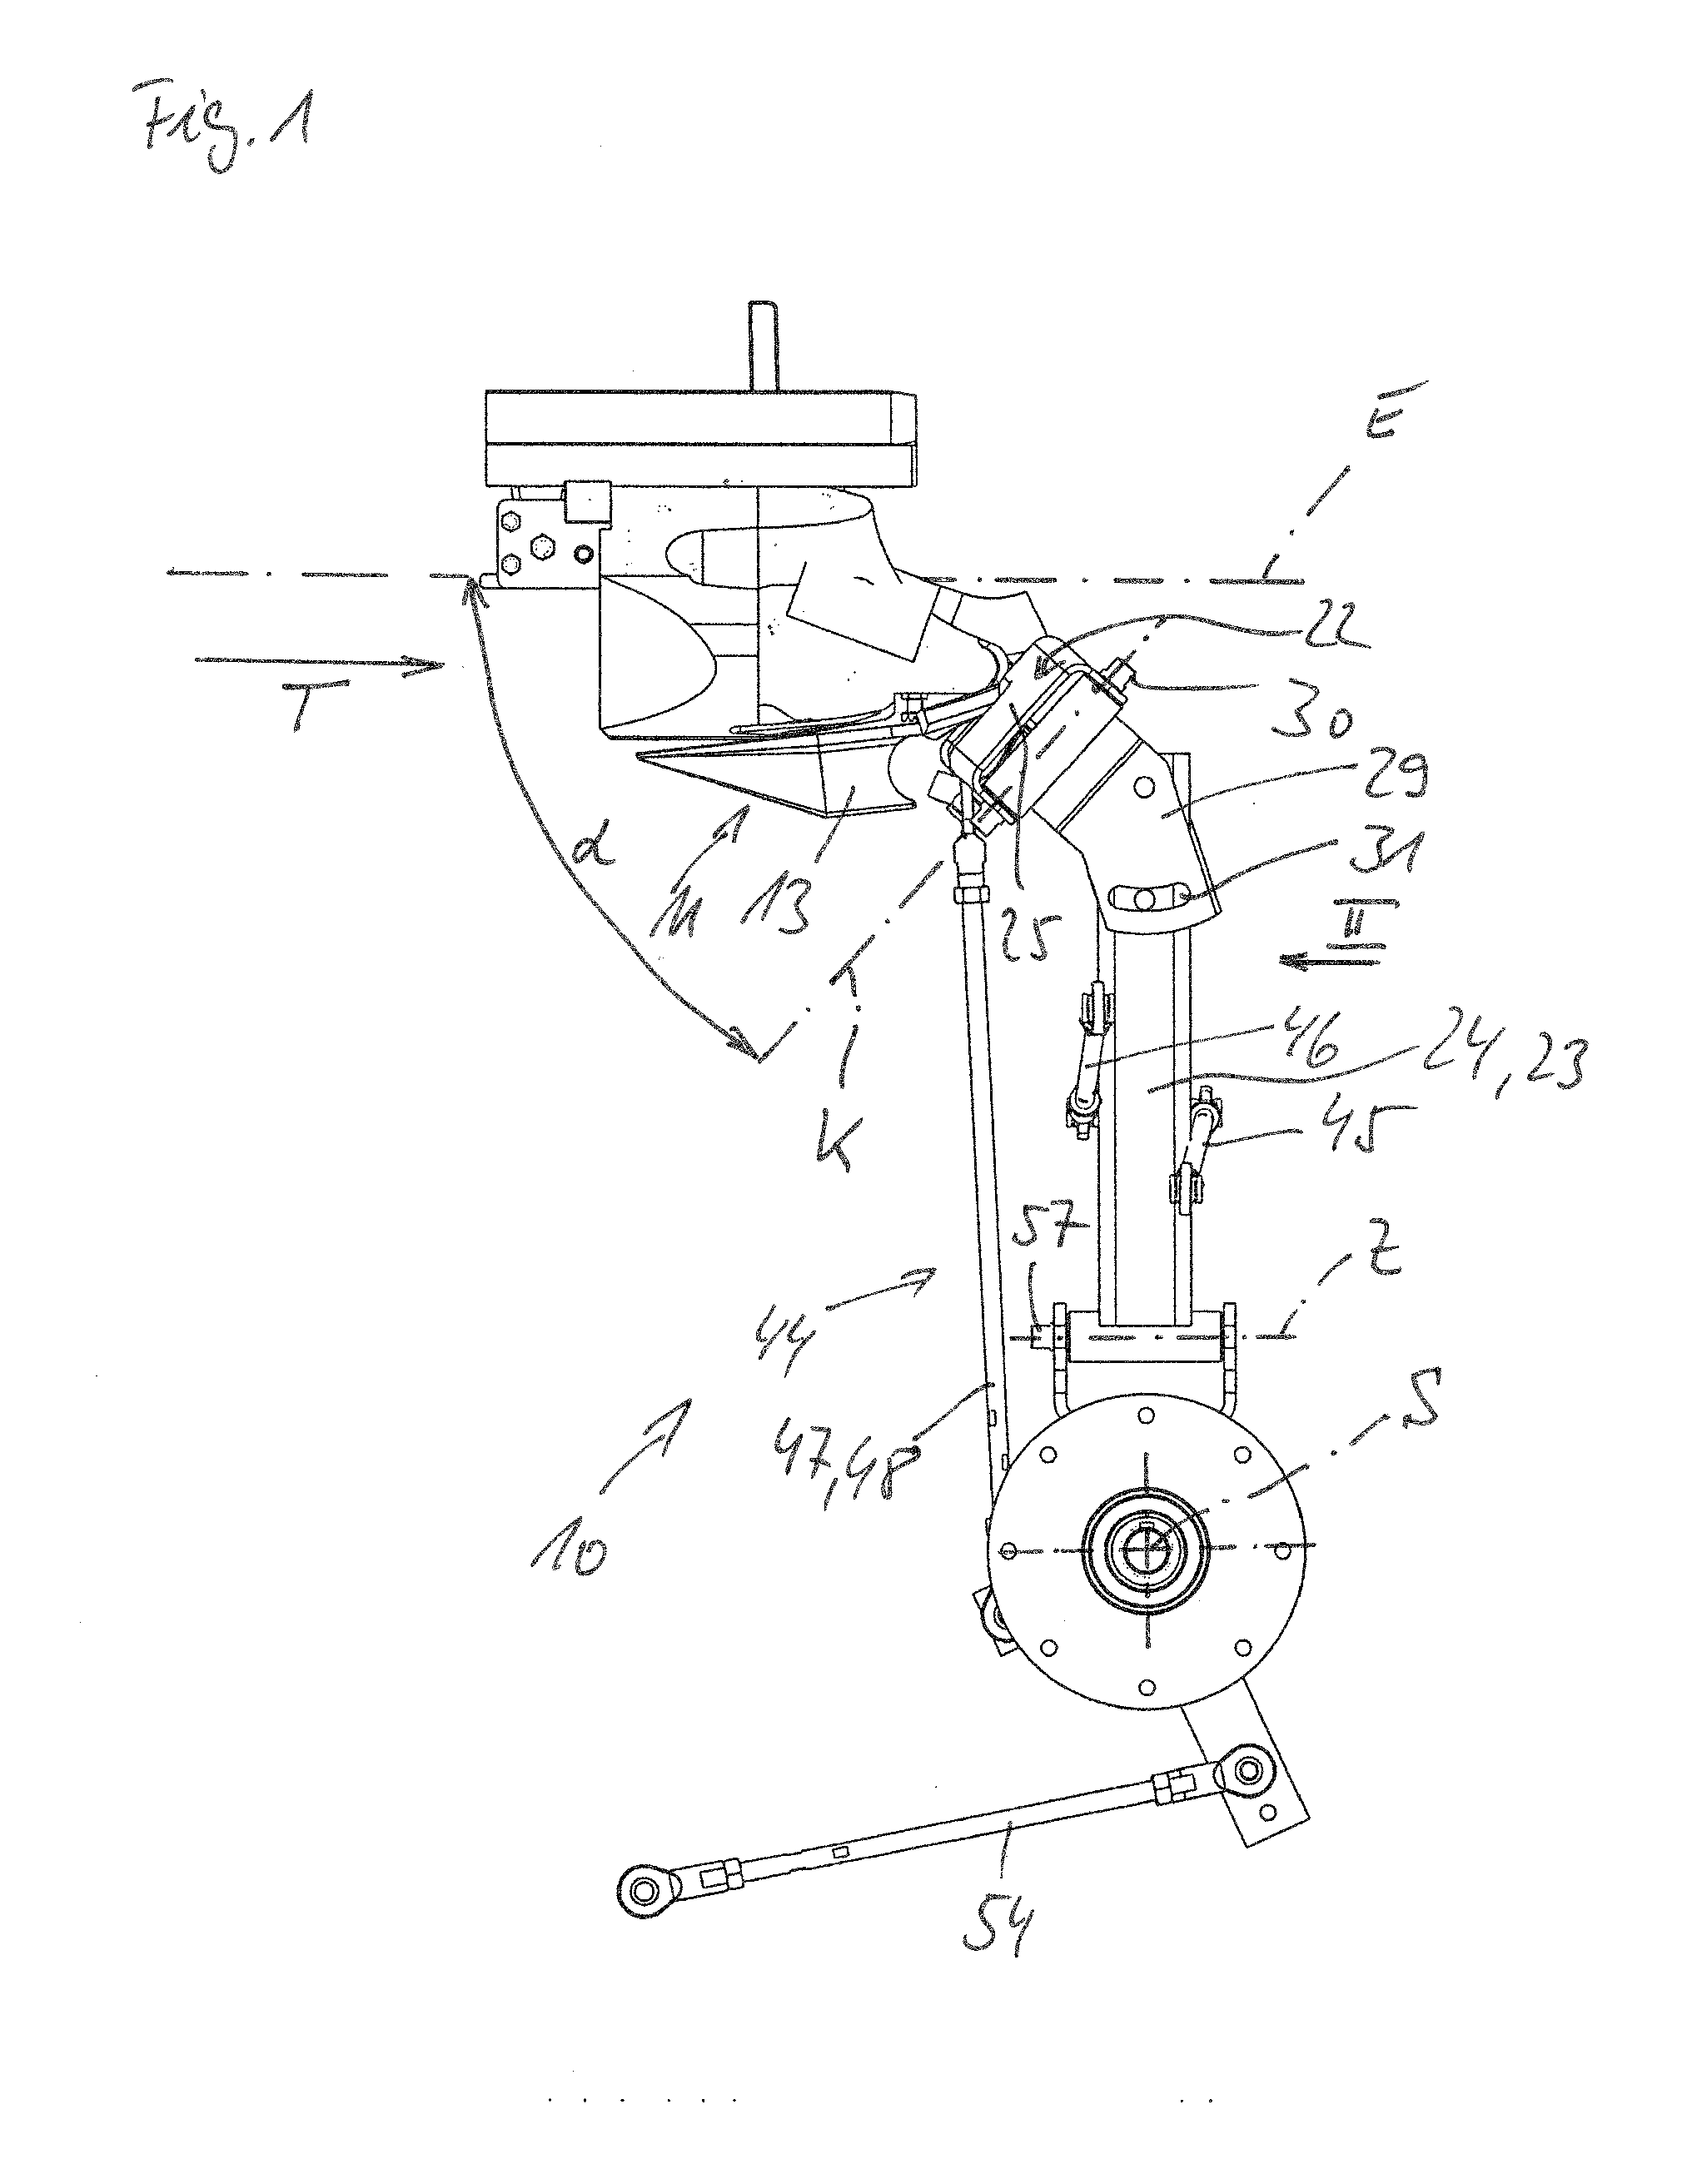 Sinew removal device, processing device having such a sinew removal device, and method for the automatic removal of sinews and/or sinew portions situated on inner breast fillets